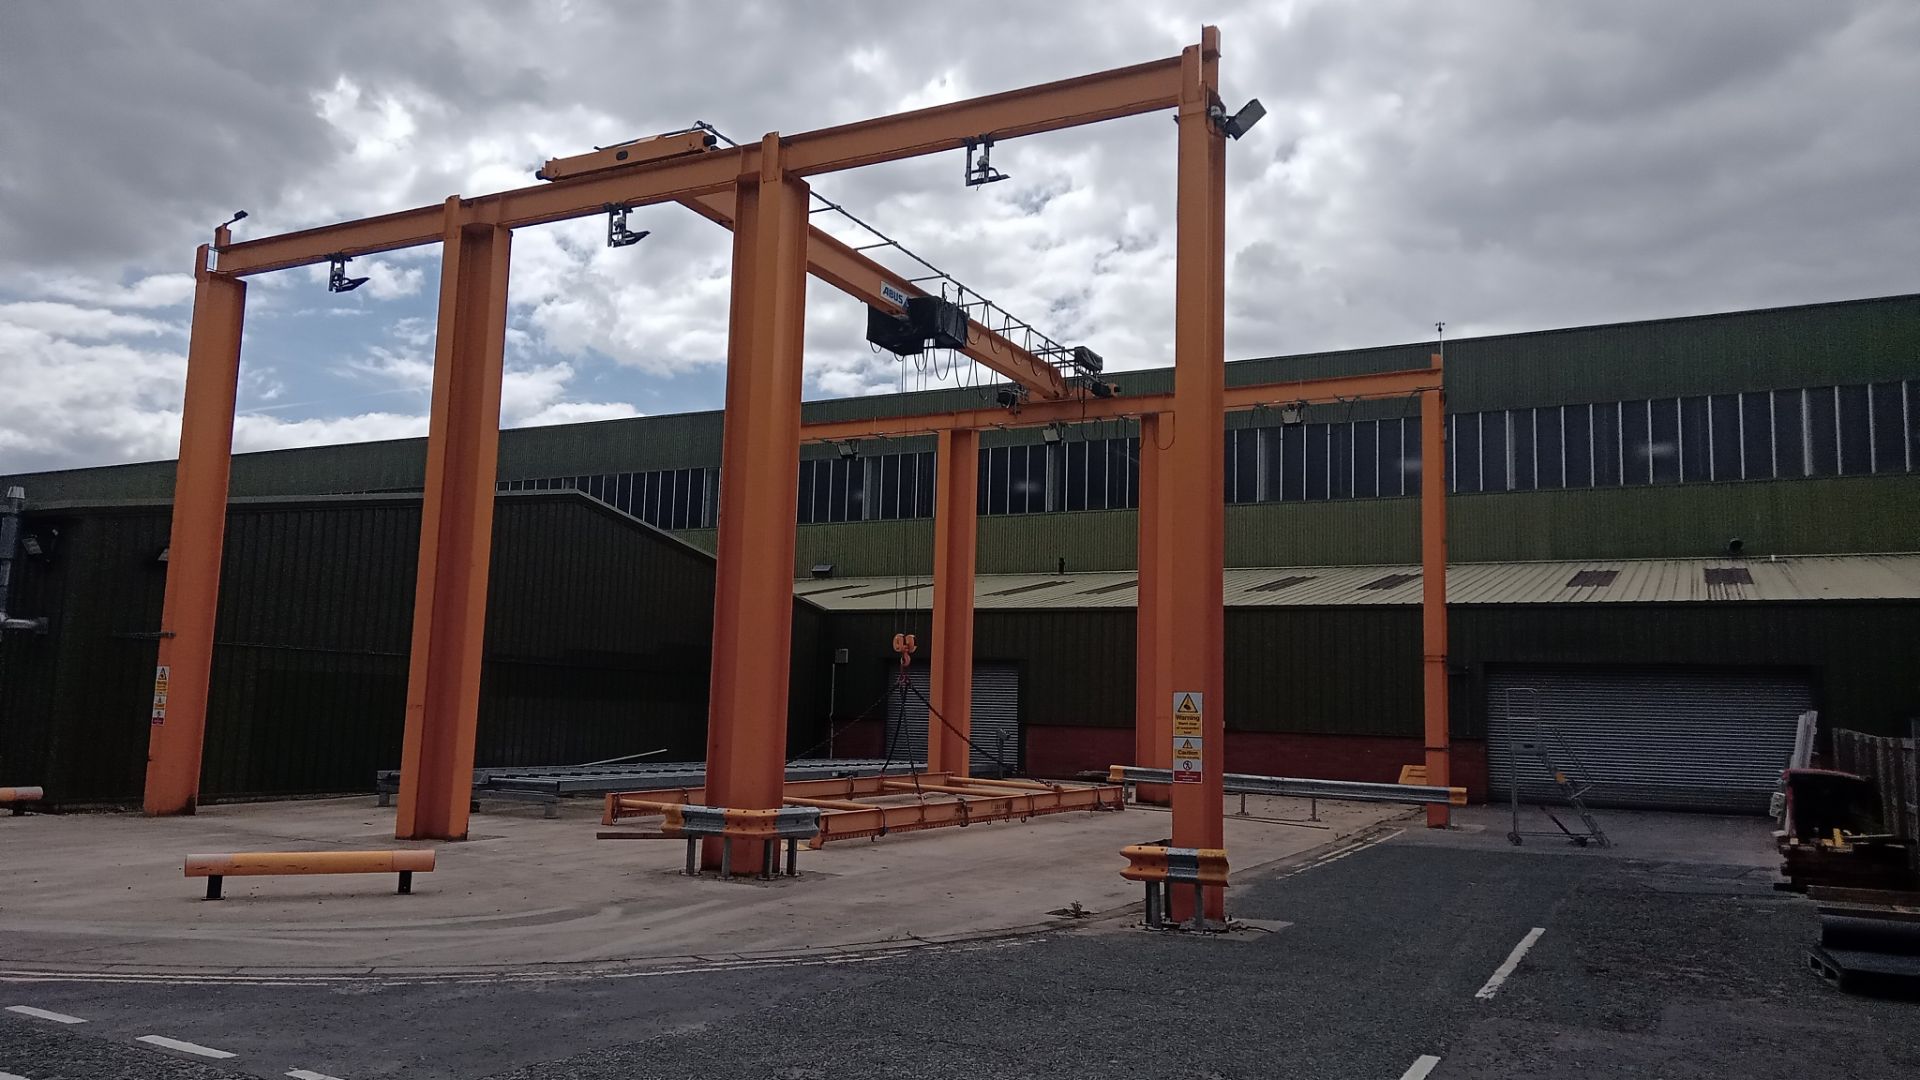 c.15m x 15m x10m High Gantry Fitted with Abus 8 Tonne Overhead Electric Travelling Crane and 4x2 Upr